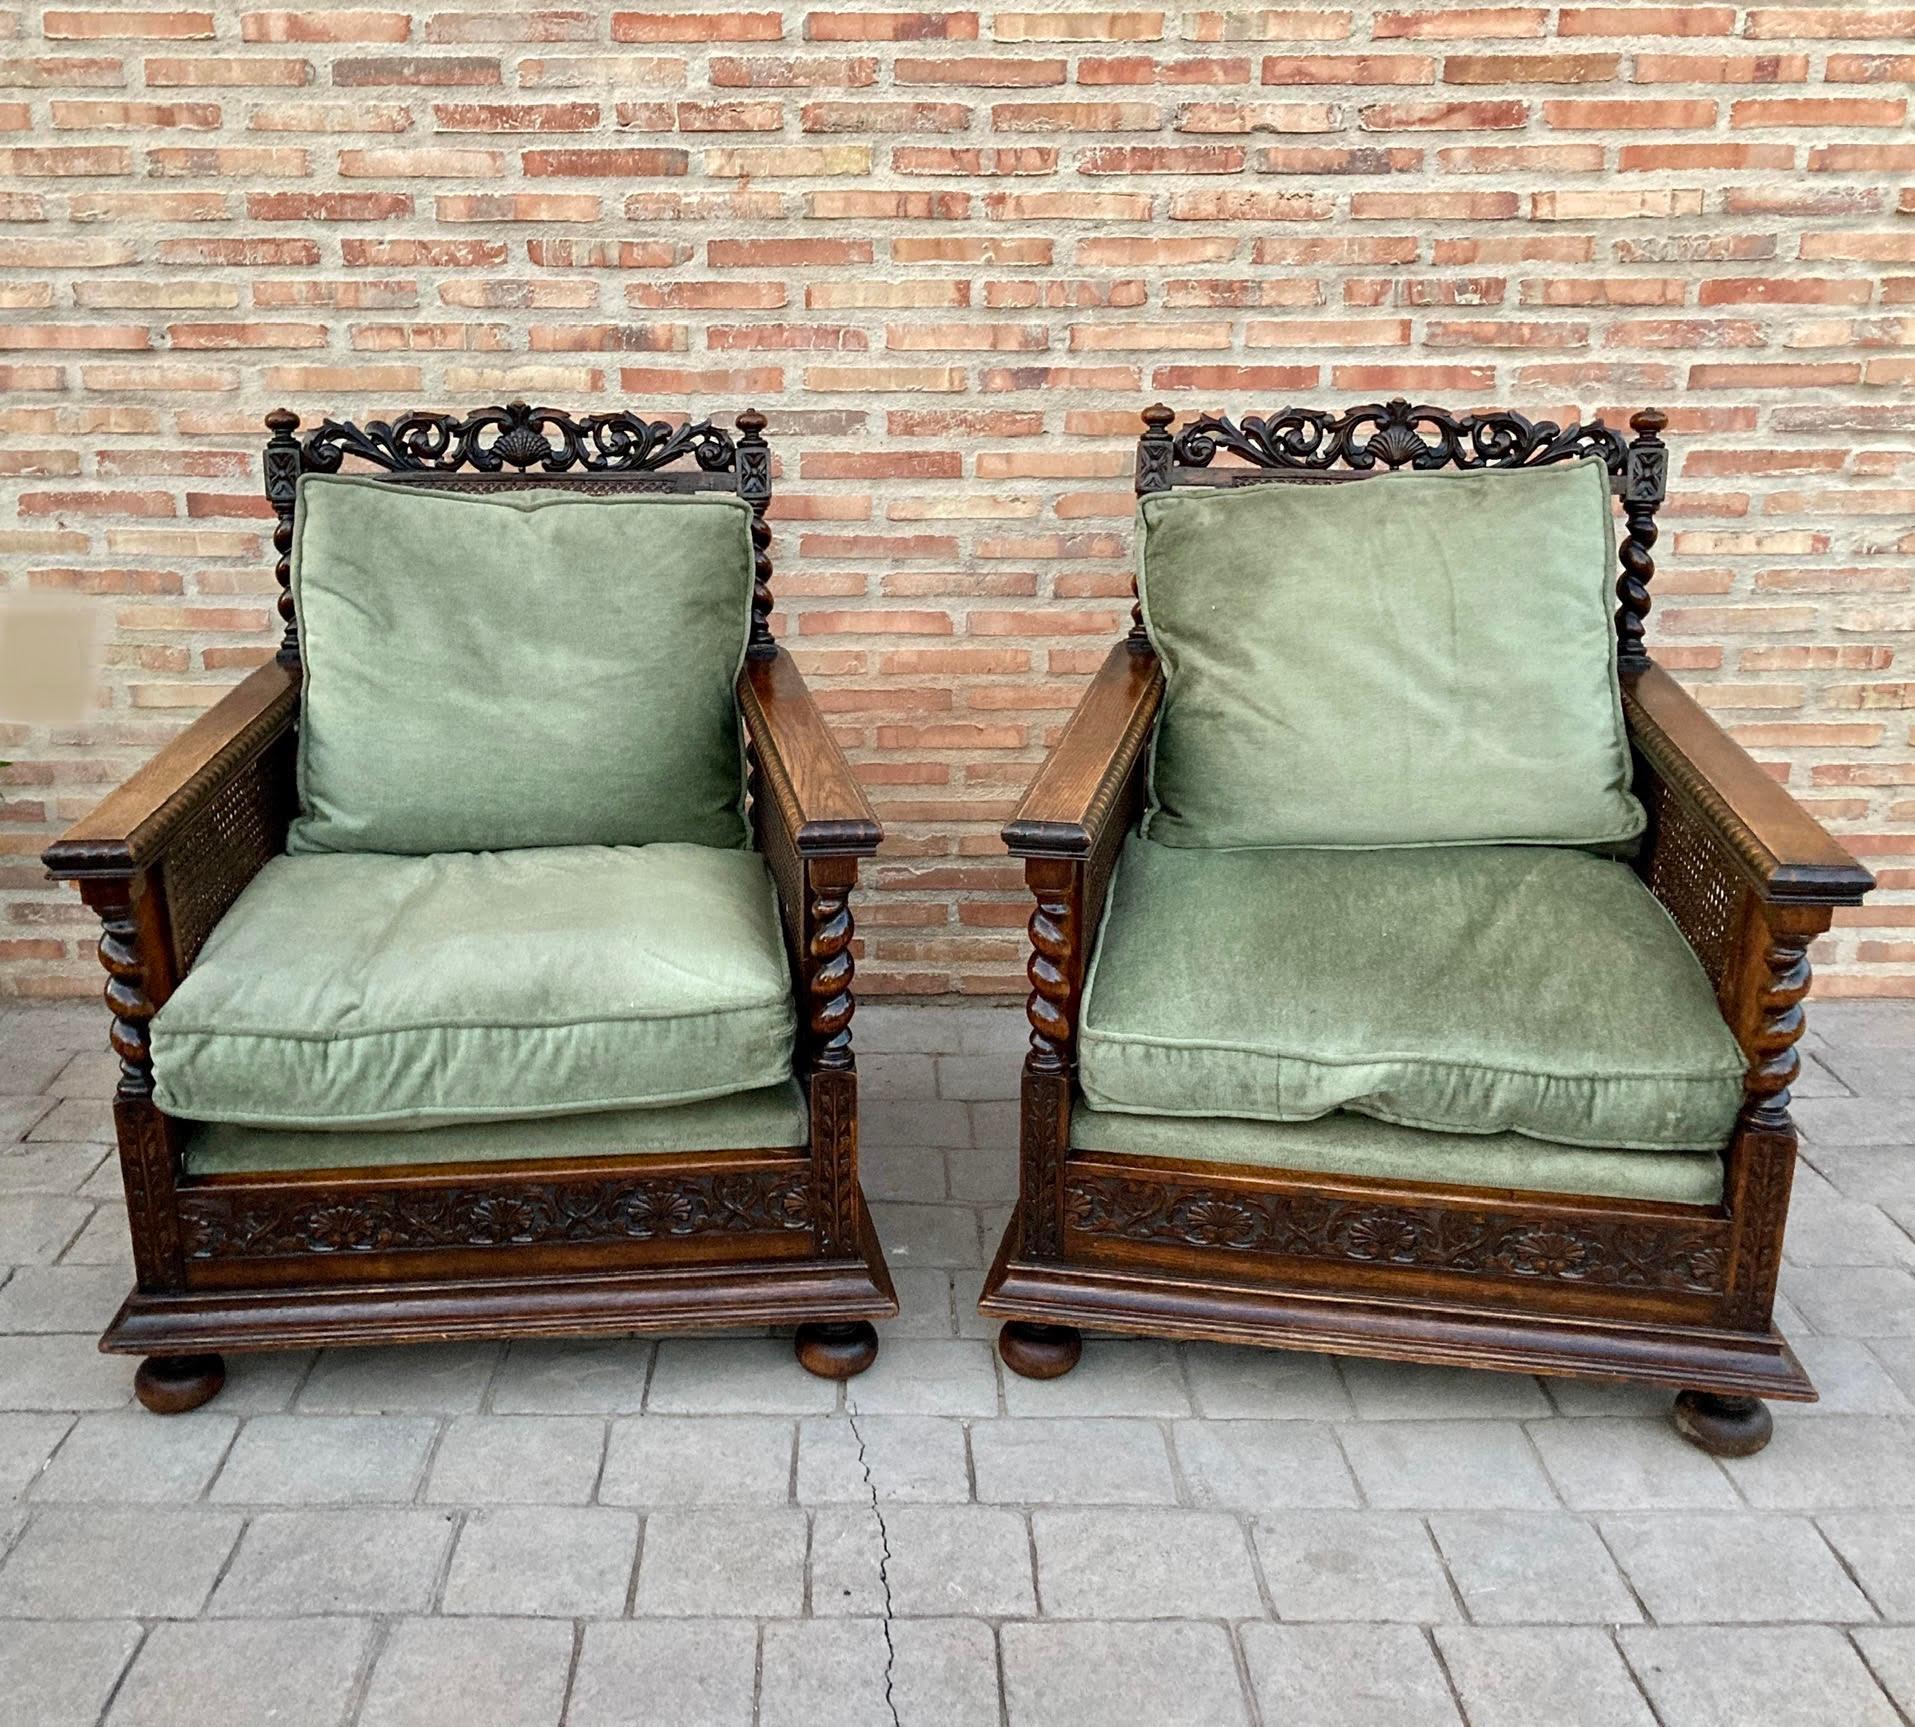 Beautiful pair of late 19th century Renaissance walnut and rattan armchair, 1890s.
Pair of Renaissance armchair, 1890s.
The structure of this impresionant armchairs is made of solid, restored Walnut wood and Rattan in very good condition. The very